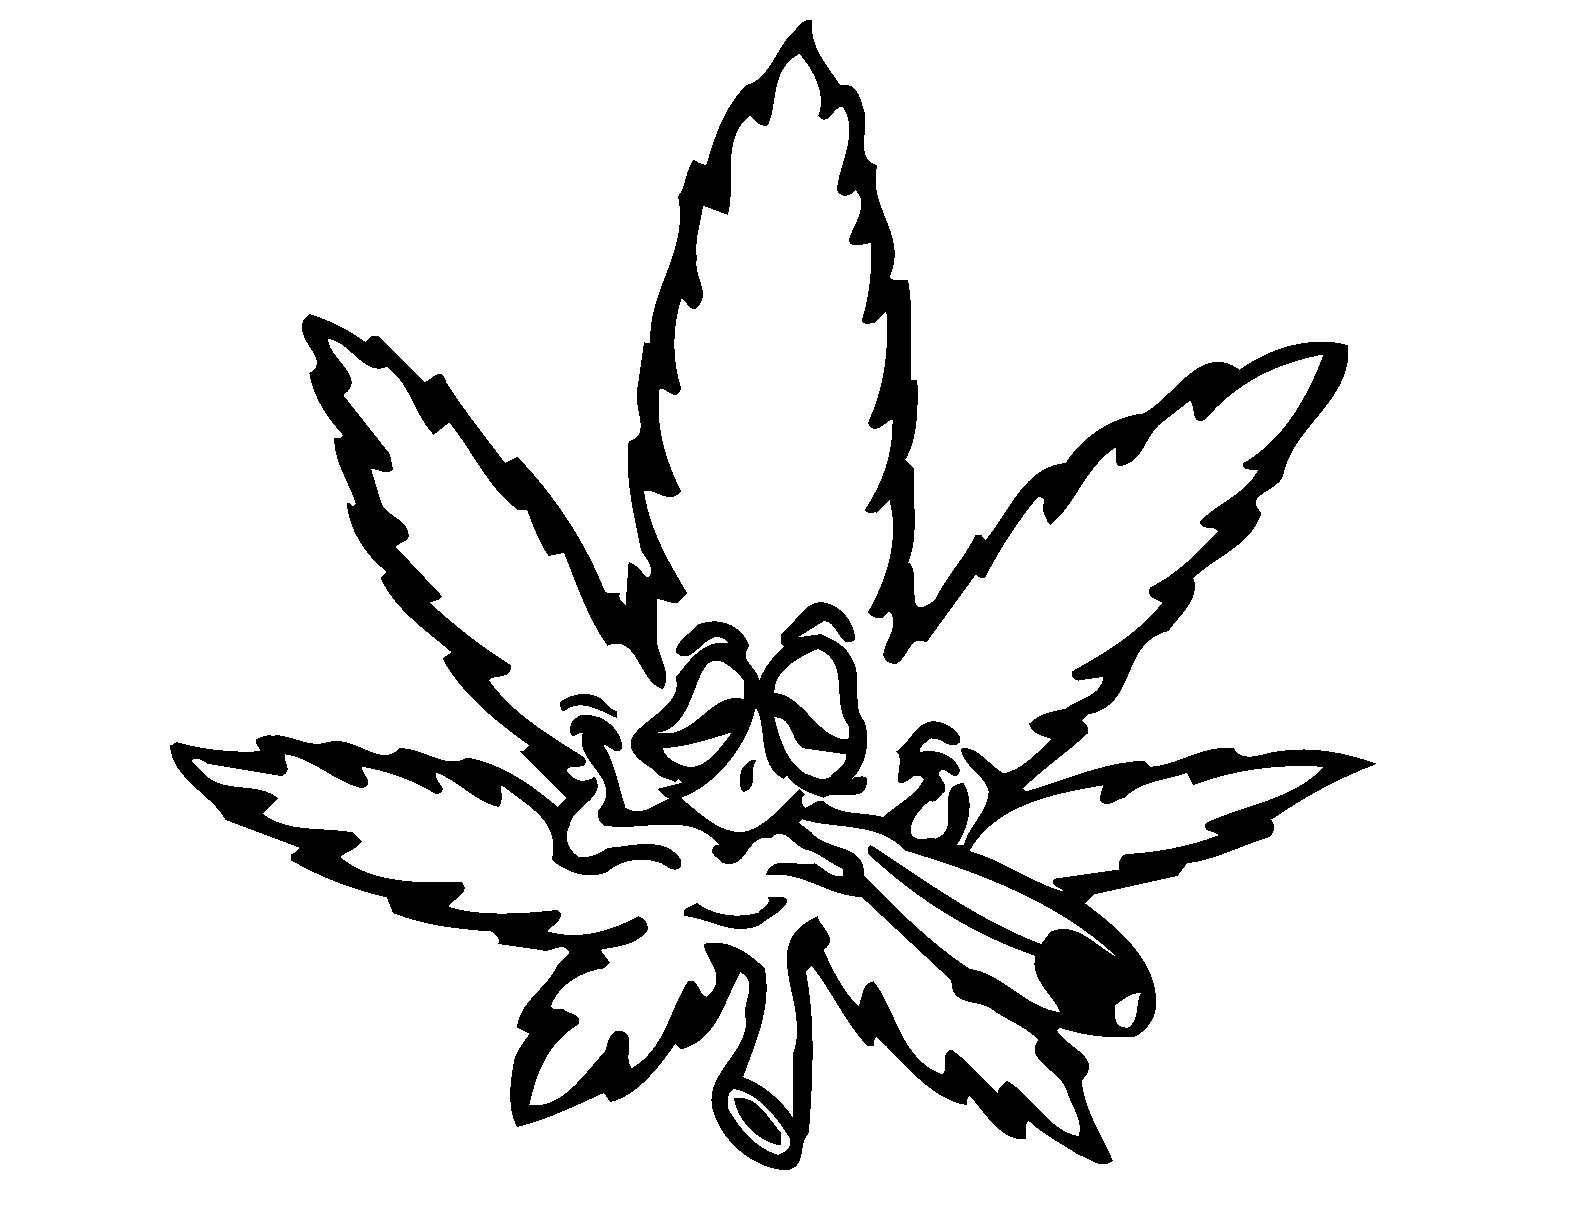 Free Weed Leaf, Download Free Clip Art, Free Clip Art on.